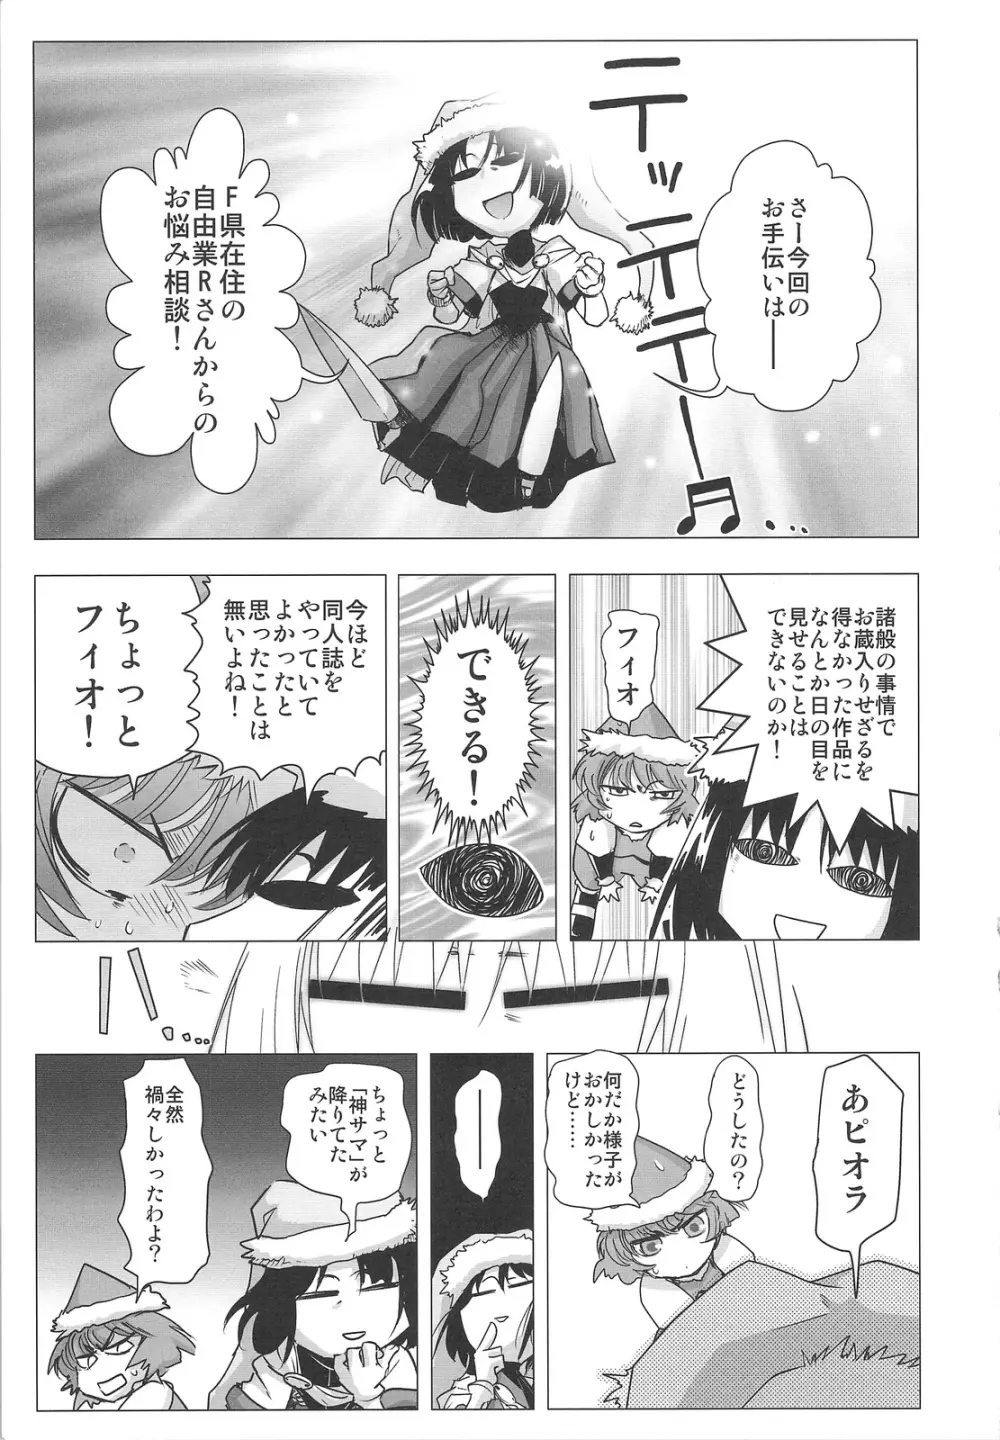 DEADLY リク通 Vol. 2 Page.4